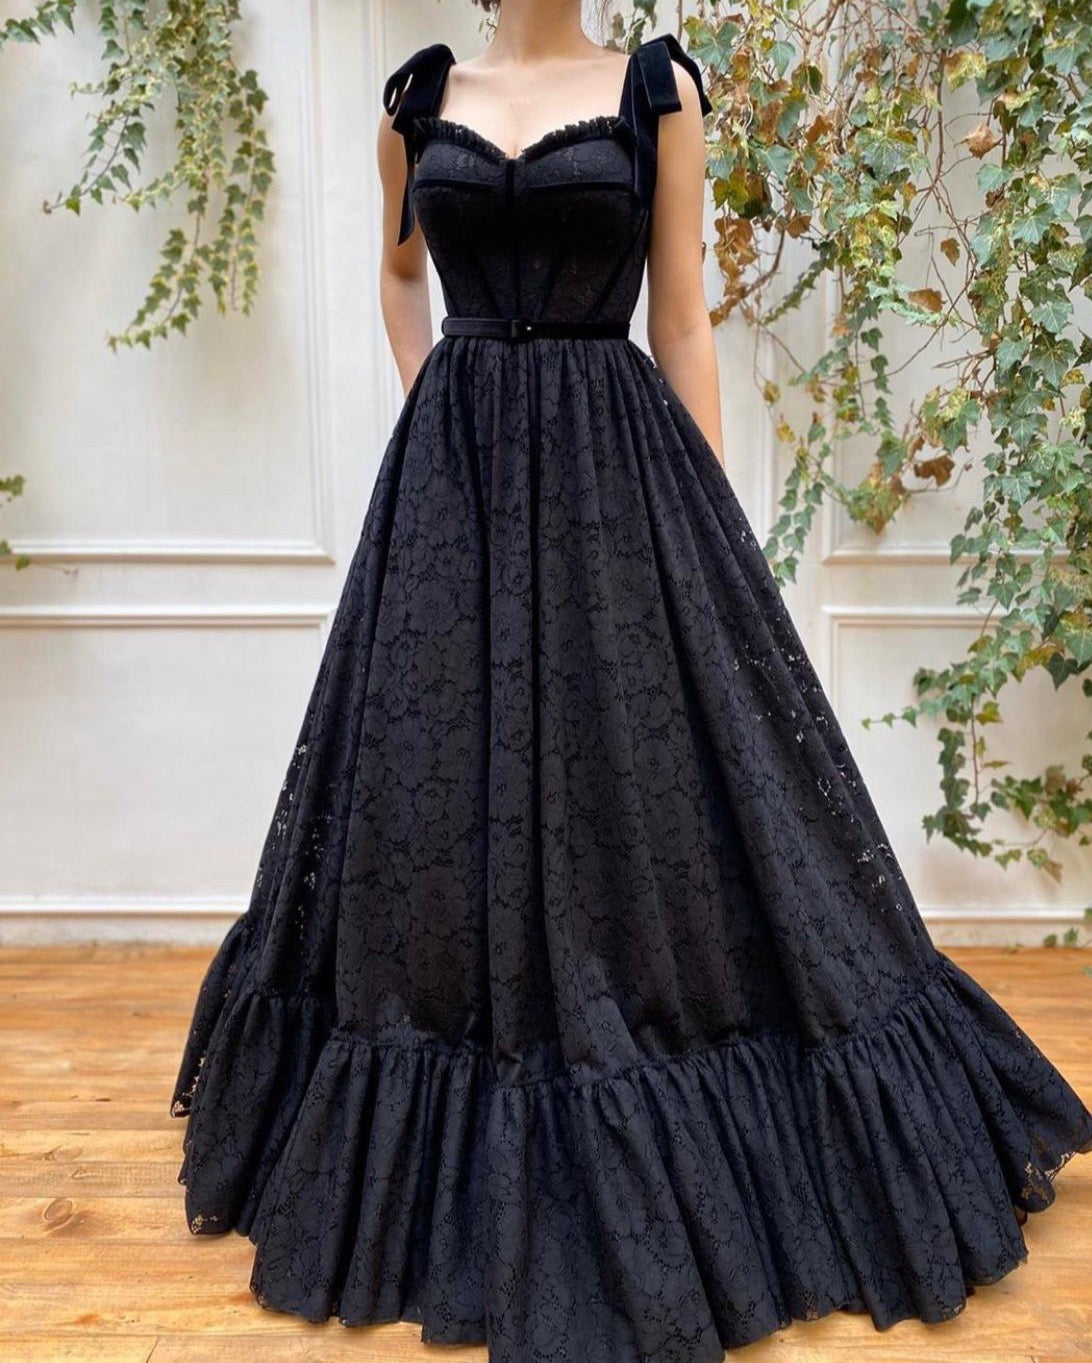 Black A-Line dress with straps and lace